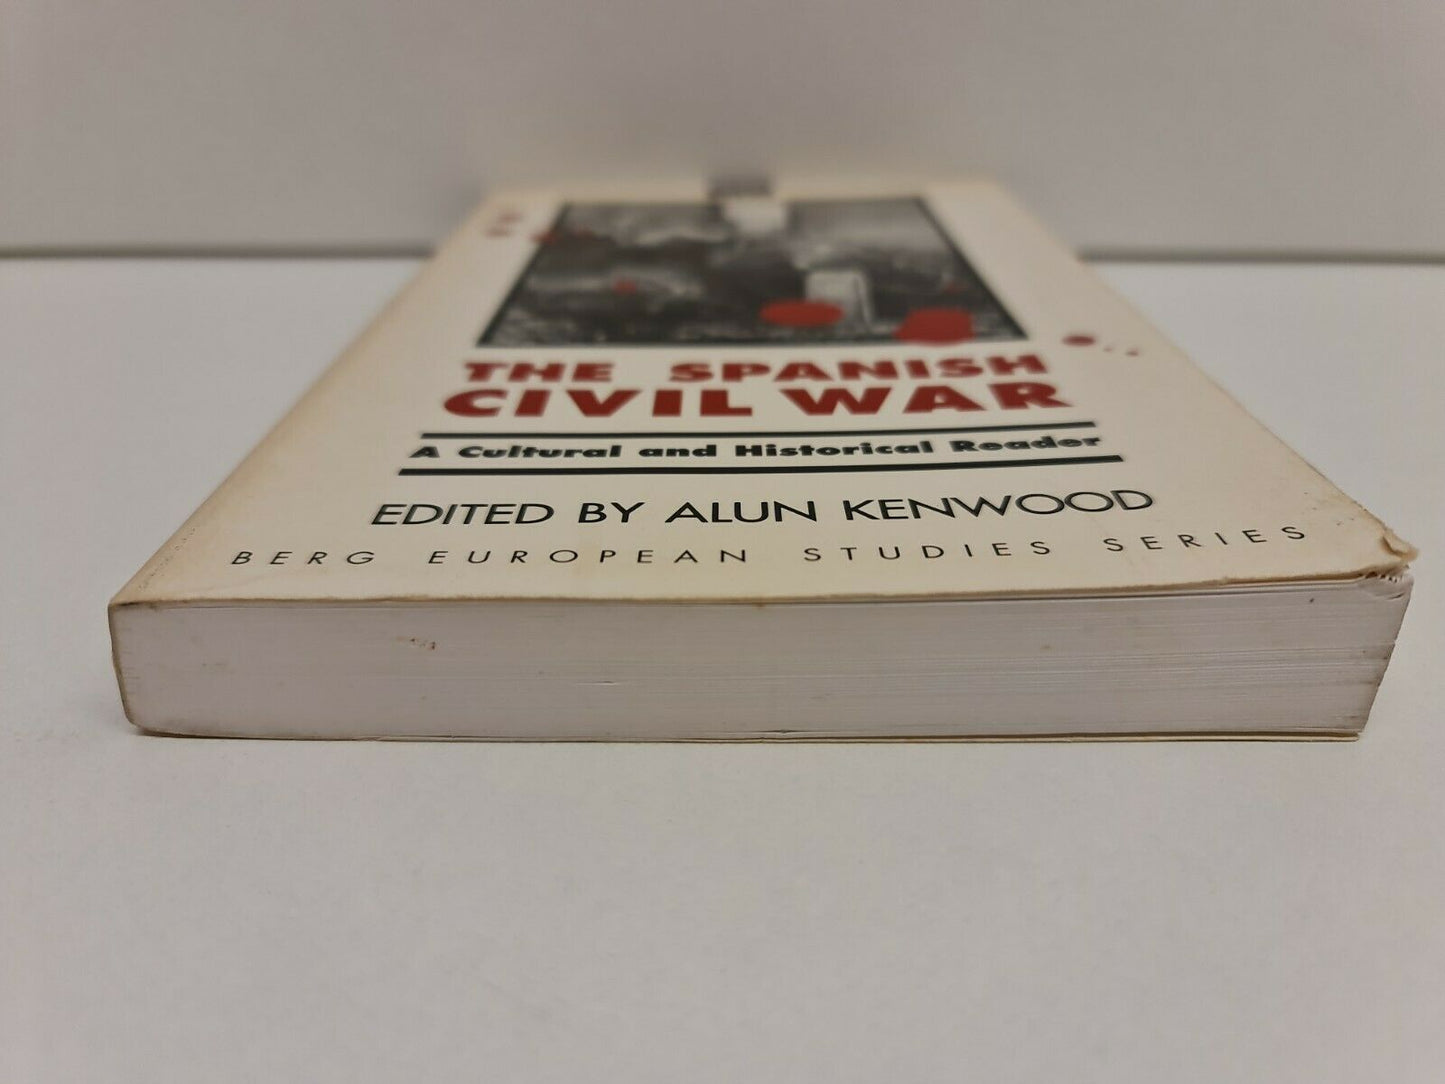 The Spanish Civil War: A Cultural and Historical Reader by Alun Kenwood